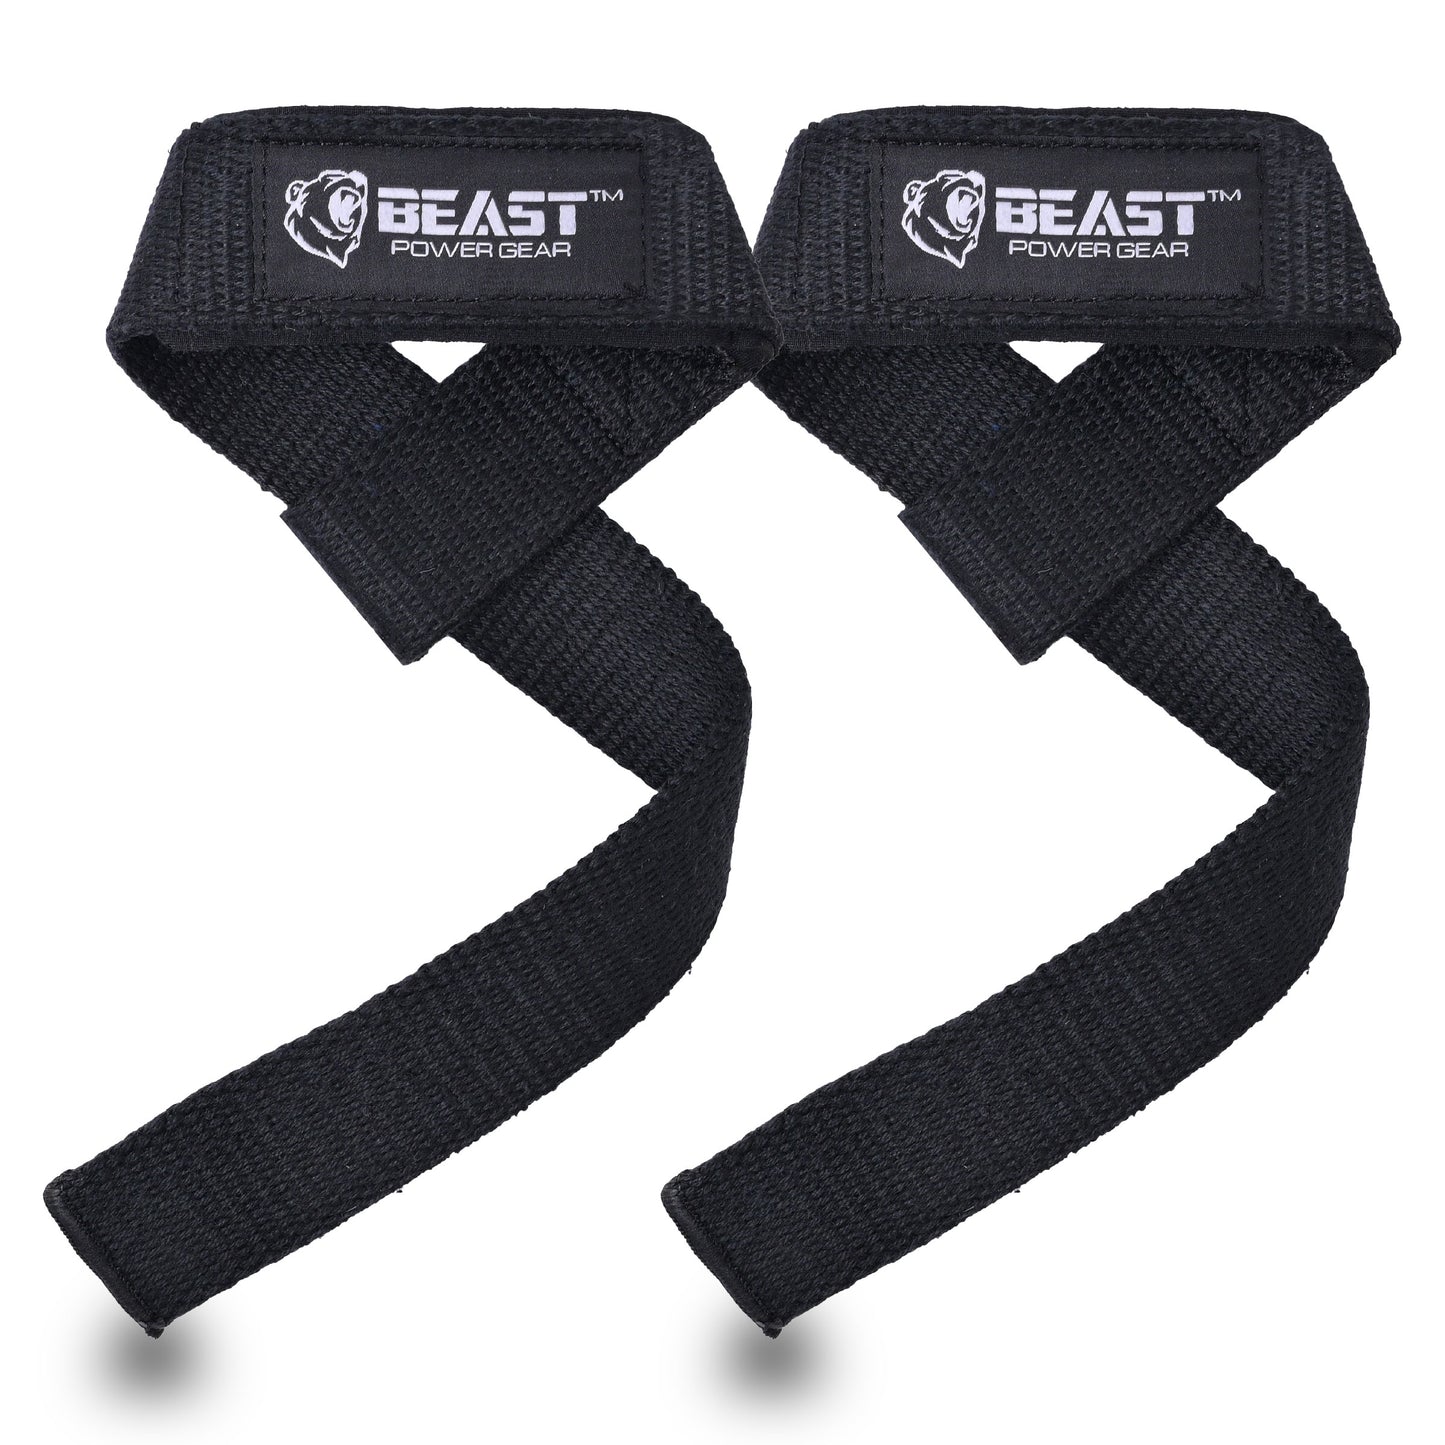 Weightlifting Lifting Straps (Solid Colors)